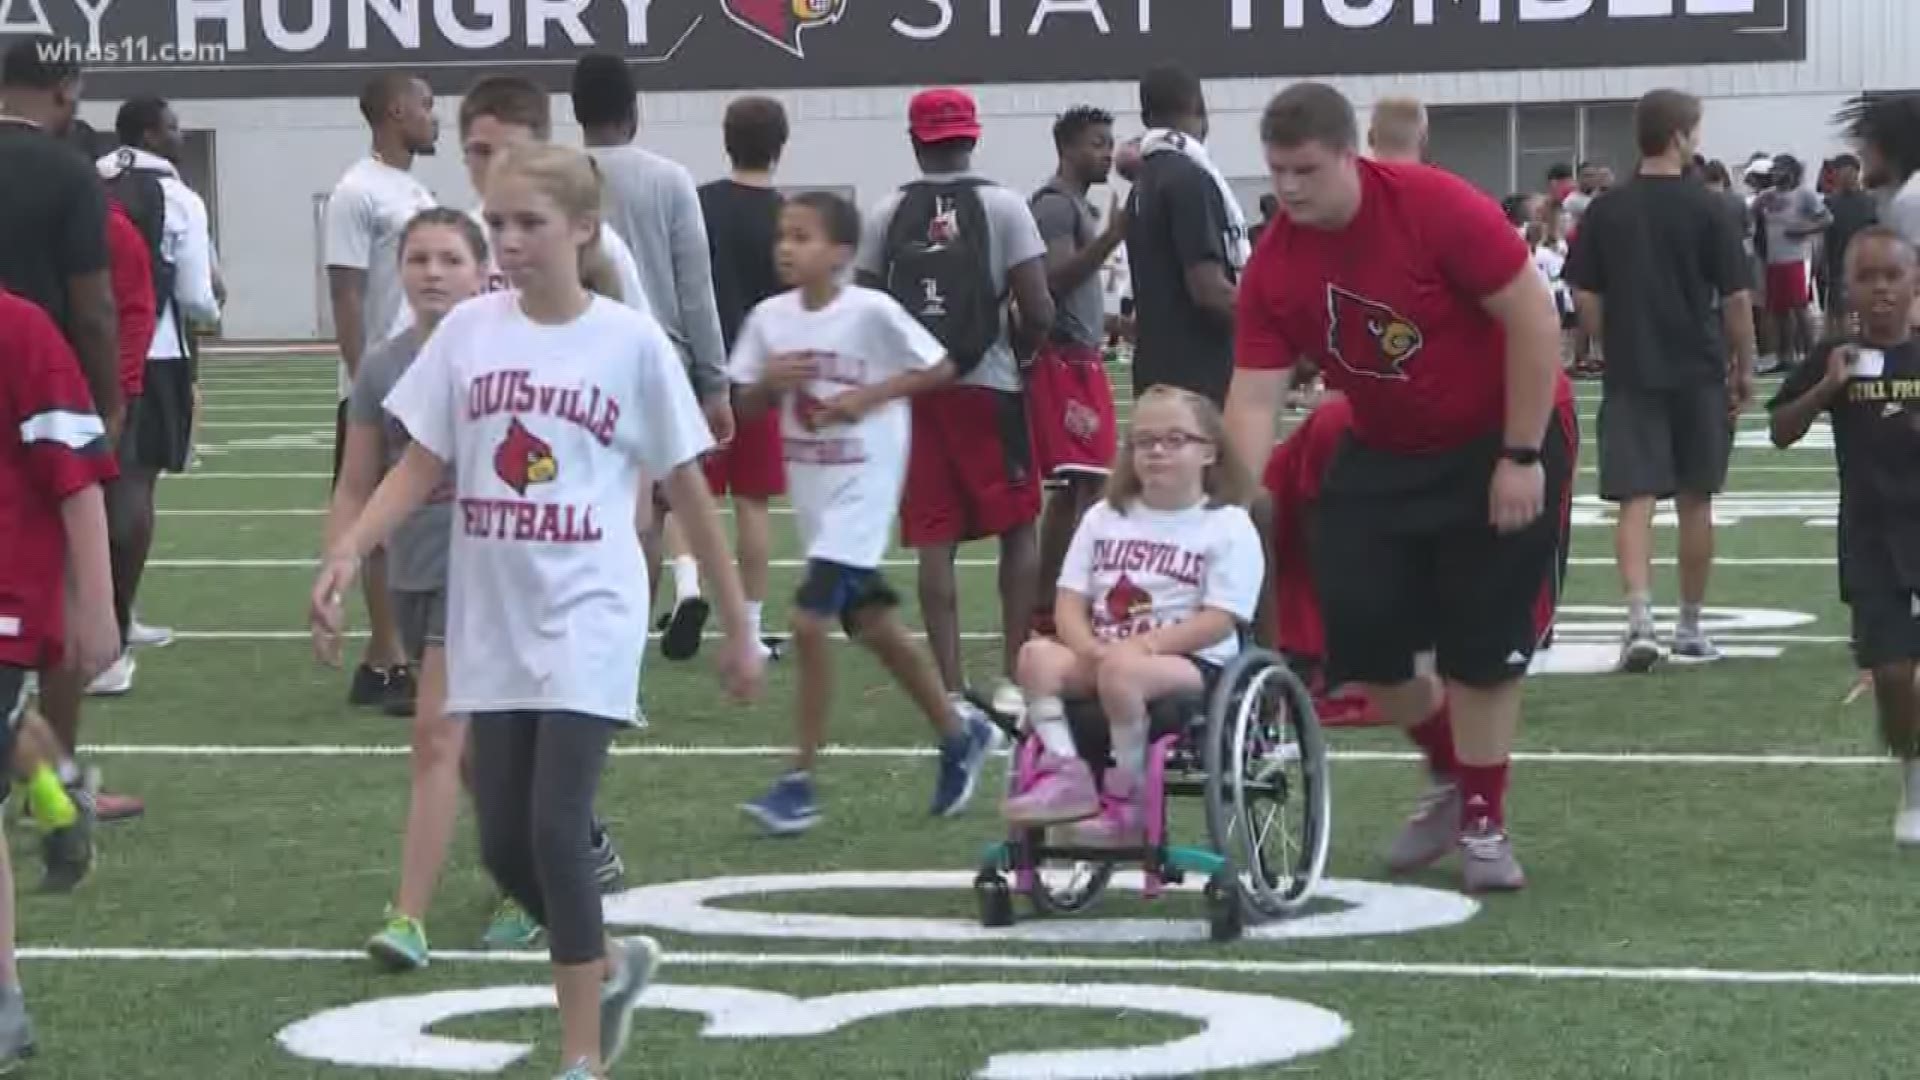 The event gives children who have experienced cancer or other illnesses an opportunity to participate in a skills camp with UofL football players and coaches.